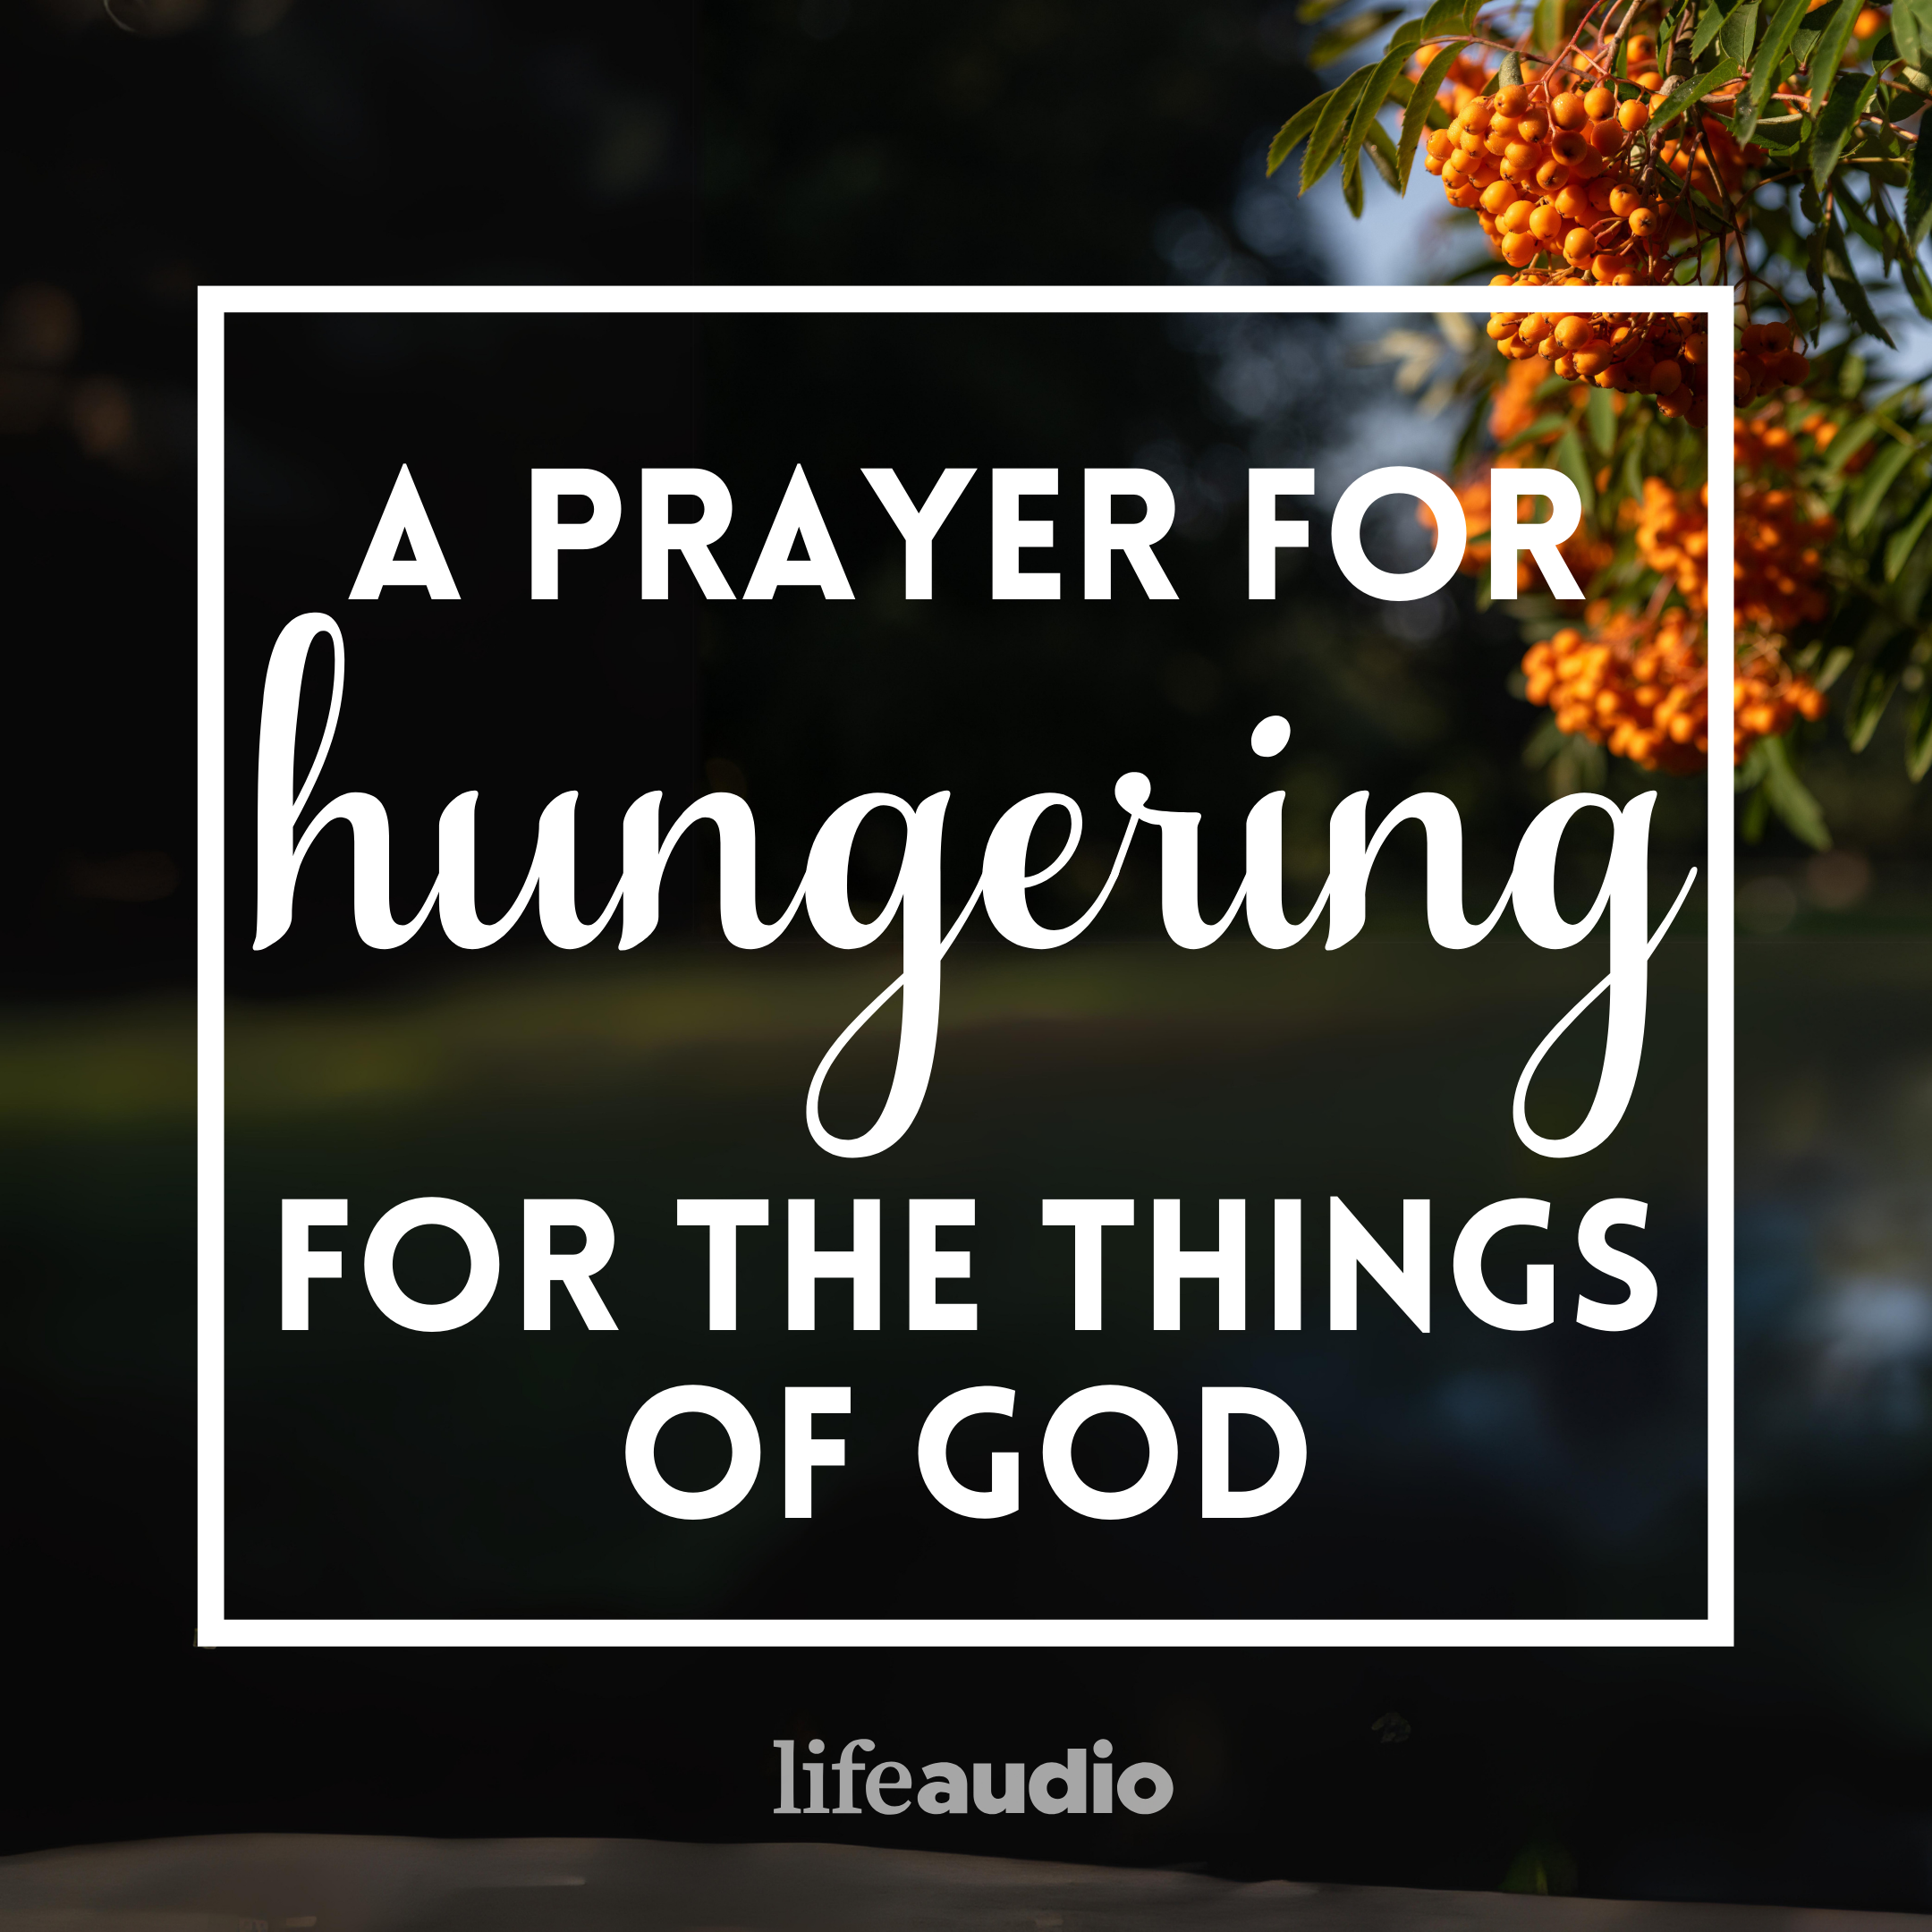 A Prayer for Hungering for the Things of God